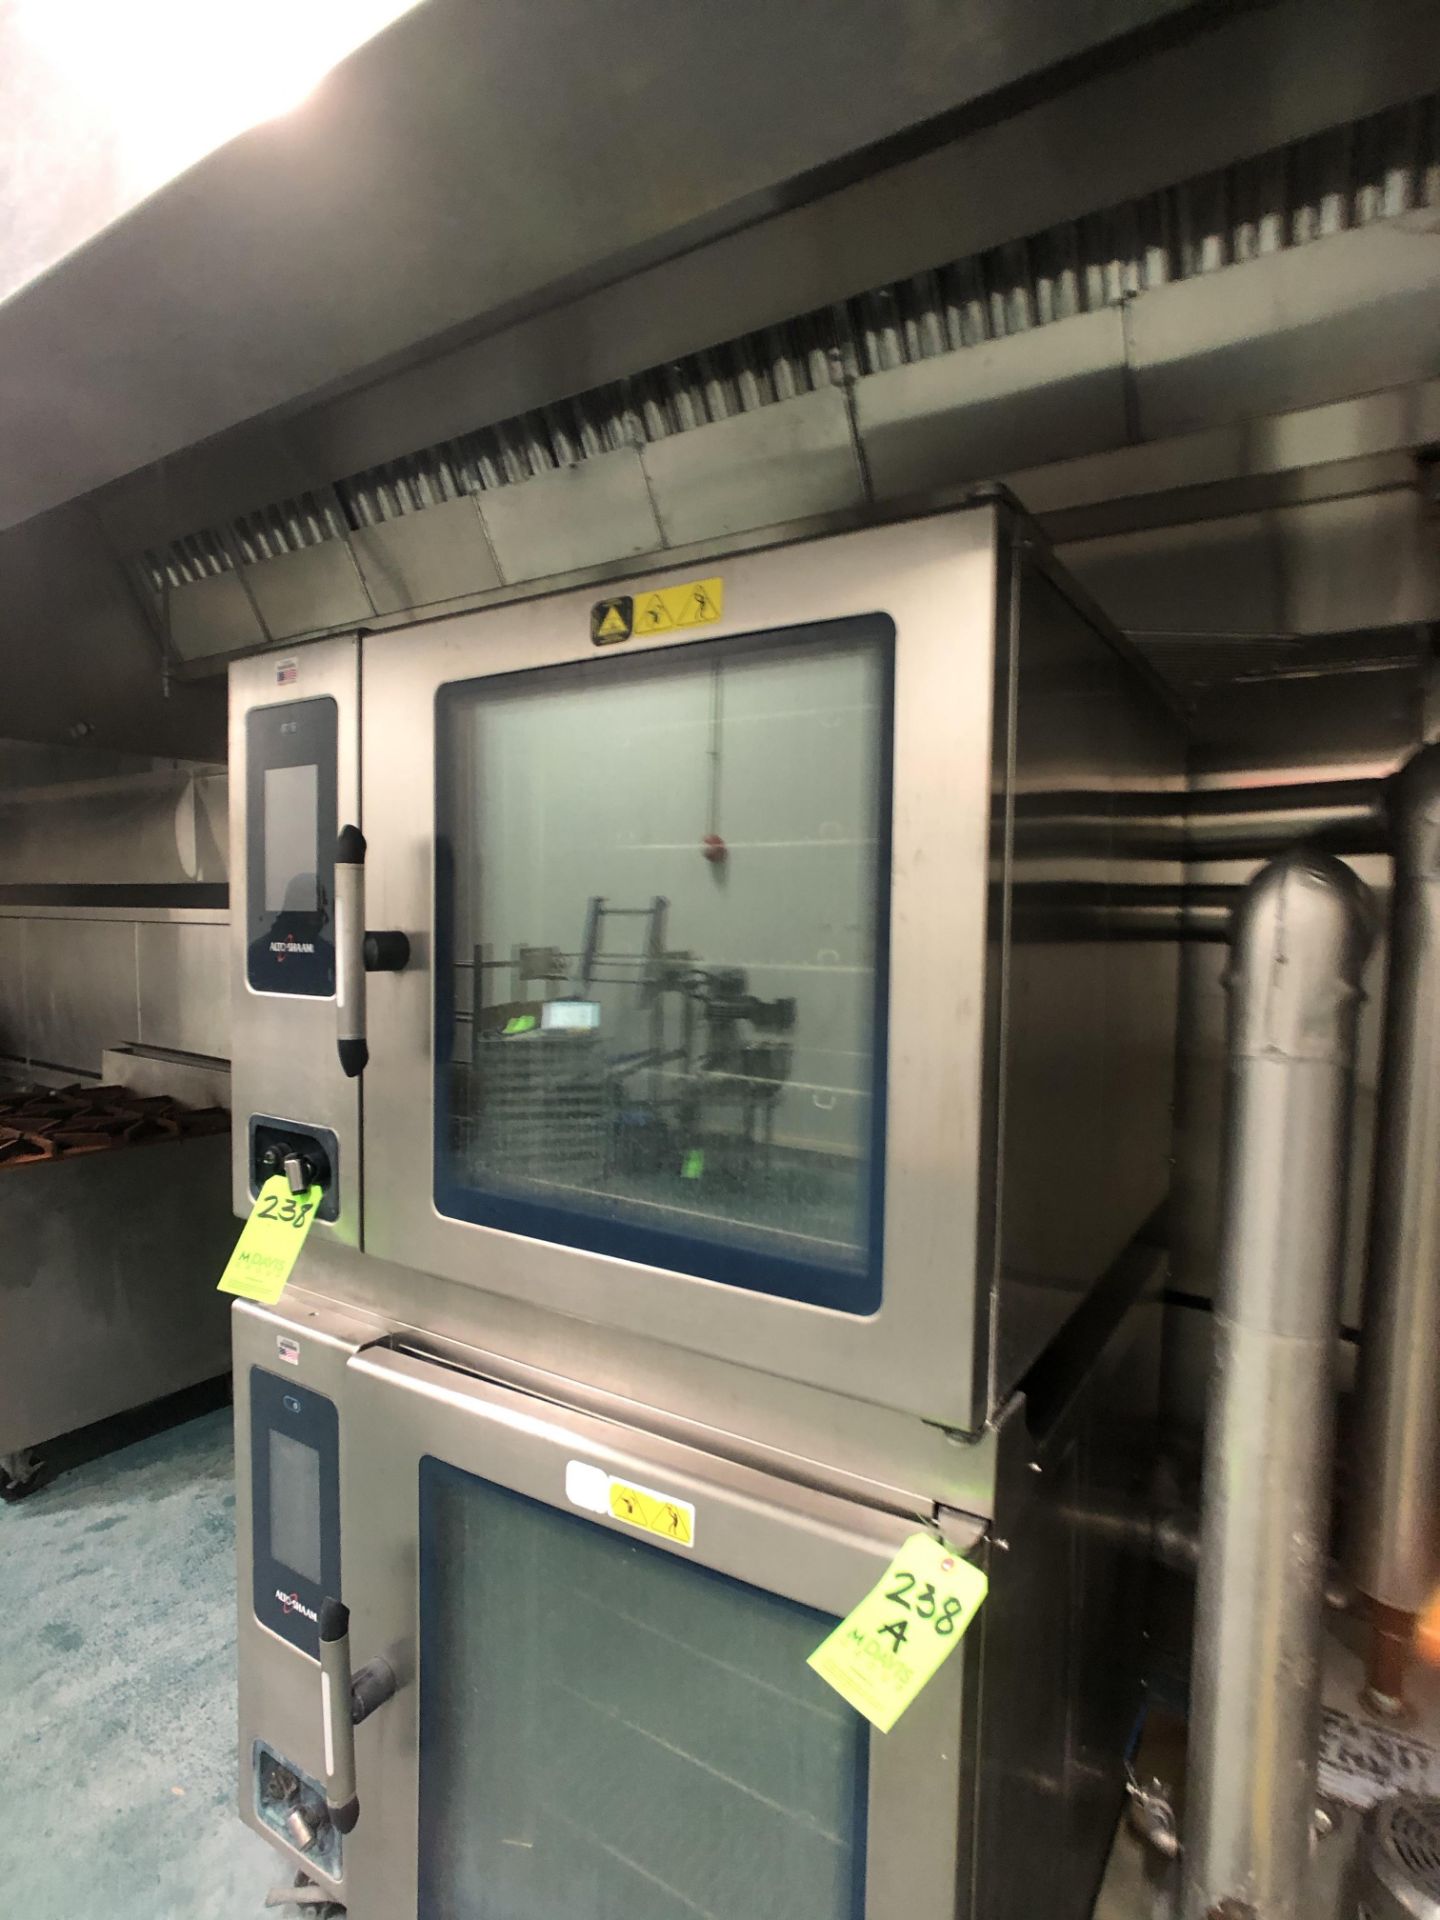 2016 ALTO-SHAAM COMBI OVENS, MODEL CTP7-20 - Image 10 of 10